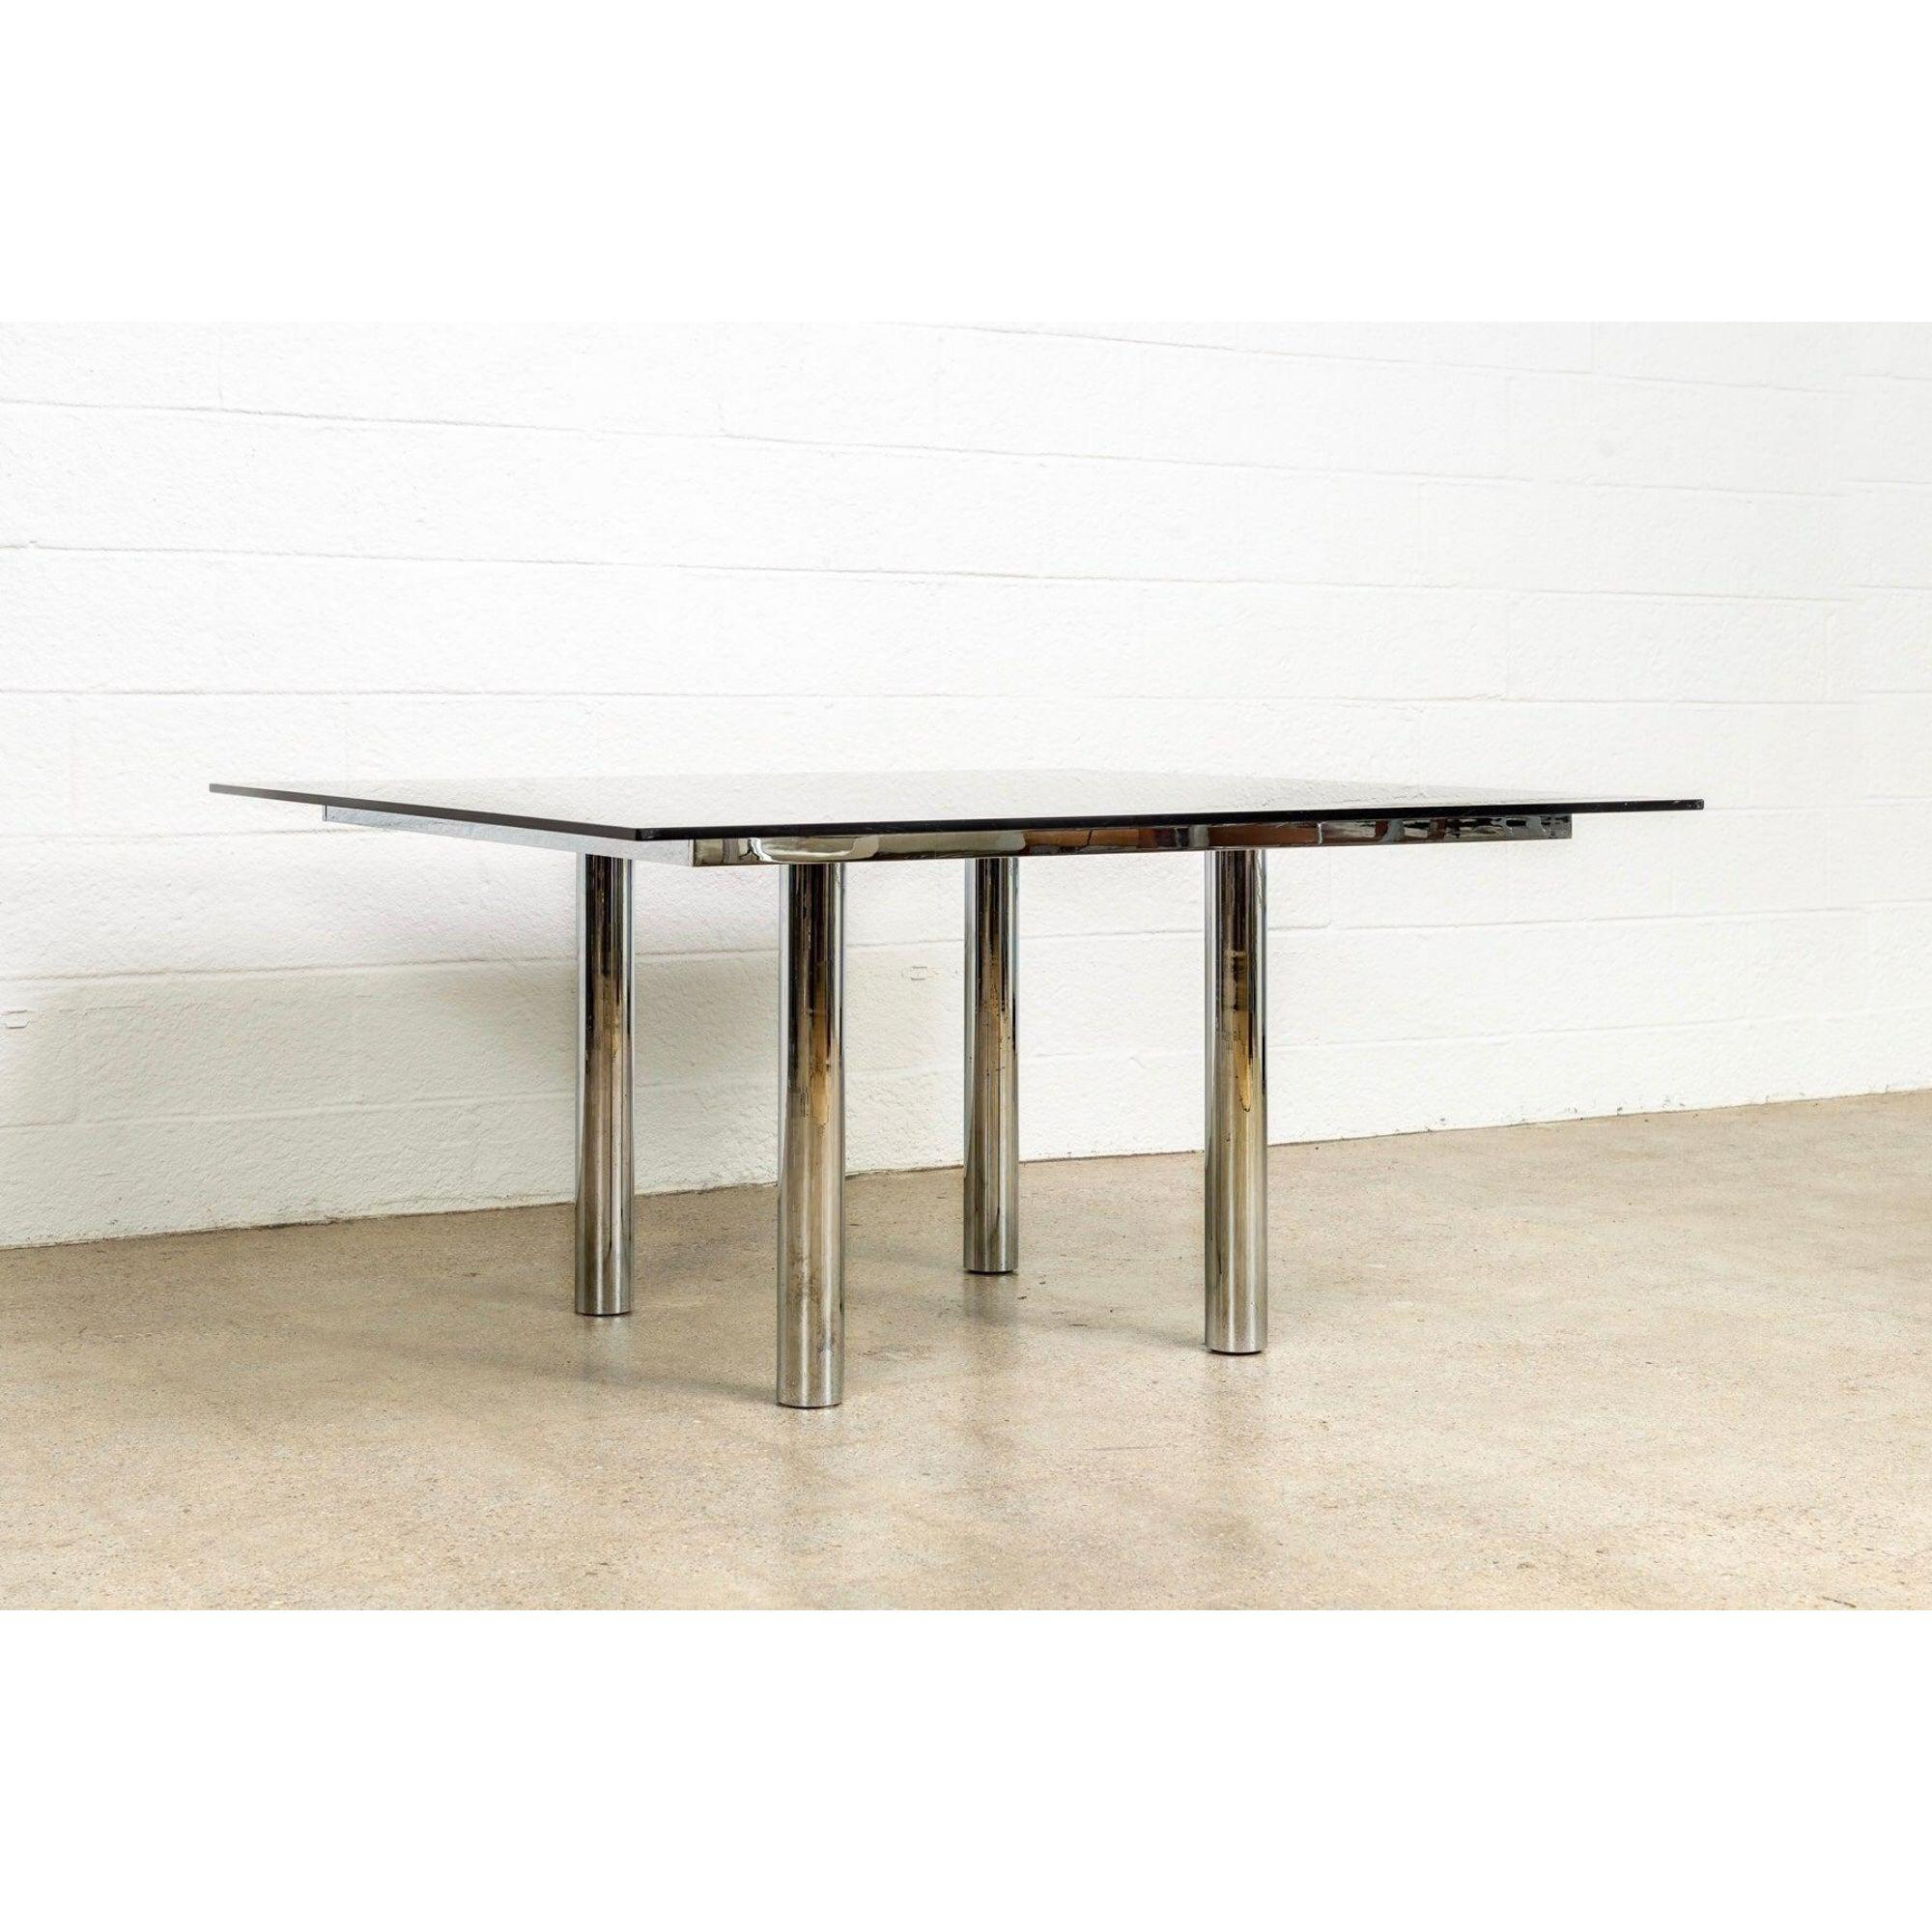 20th Century Mid Century 'Andre' Dining Table in Glass & Chrome by Tobia Scarpa